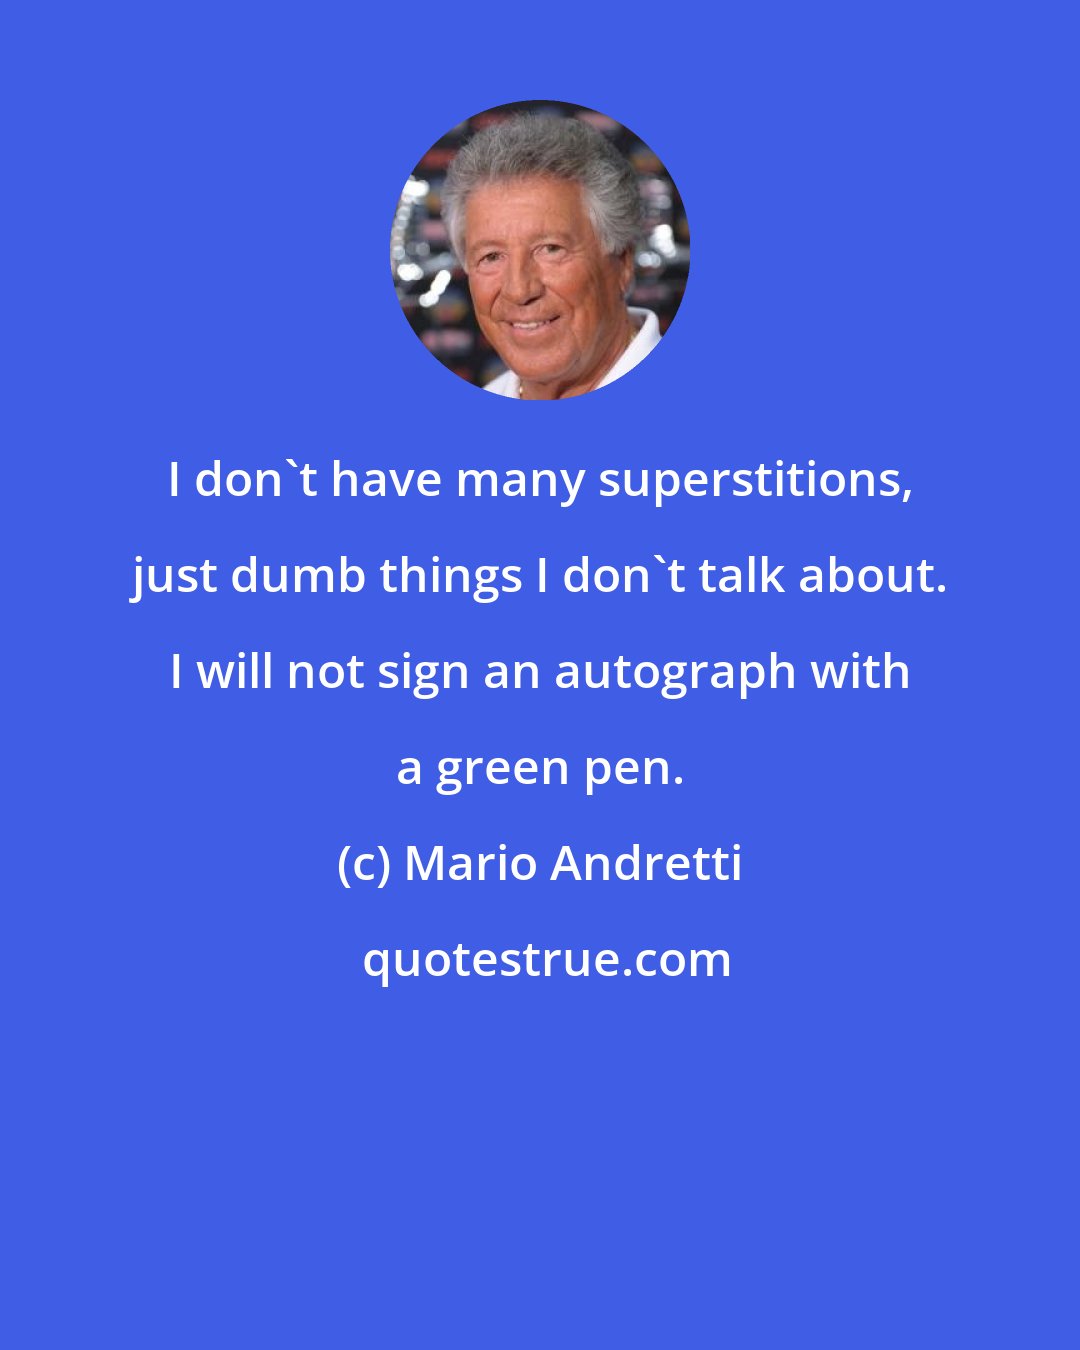 Mario Andretti: I don't have many superstitions, just dumb things I don't talk about. I will not sign an autograph with a green pen.